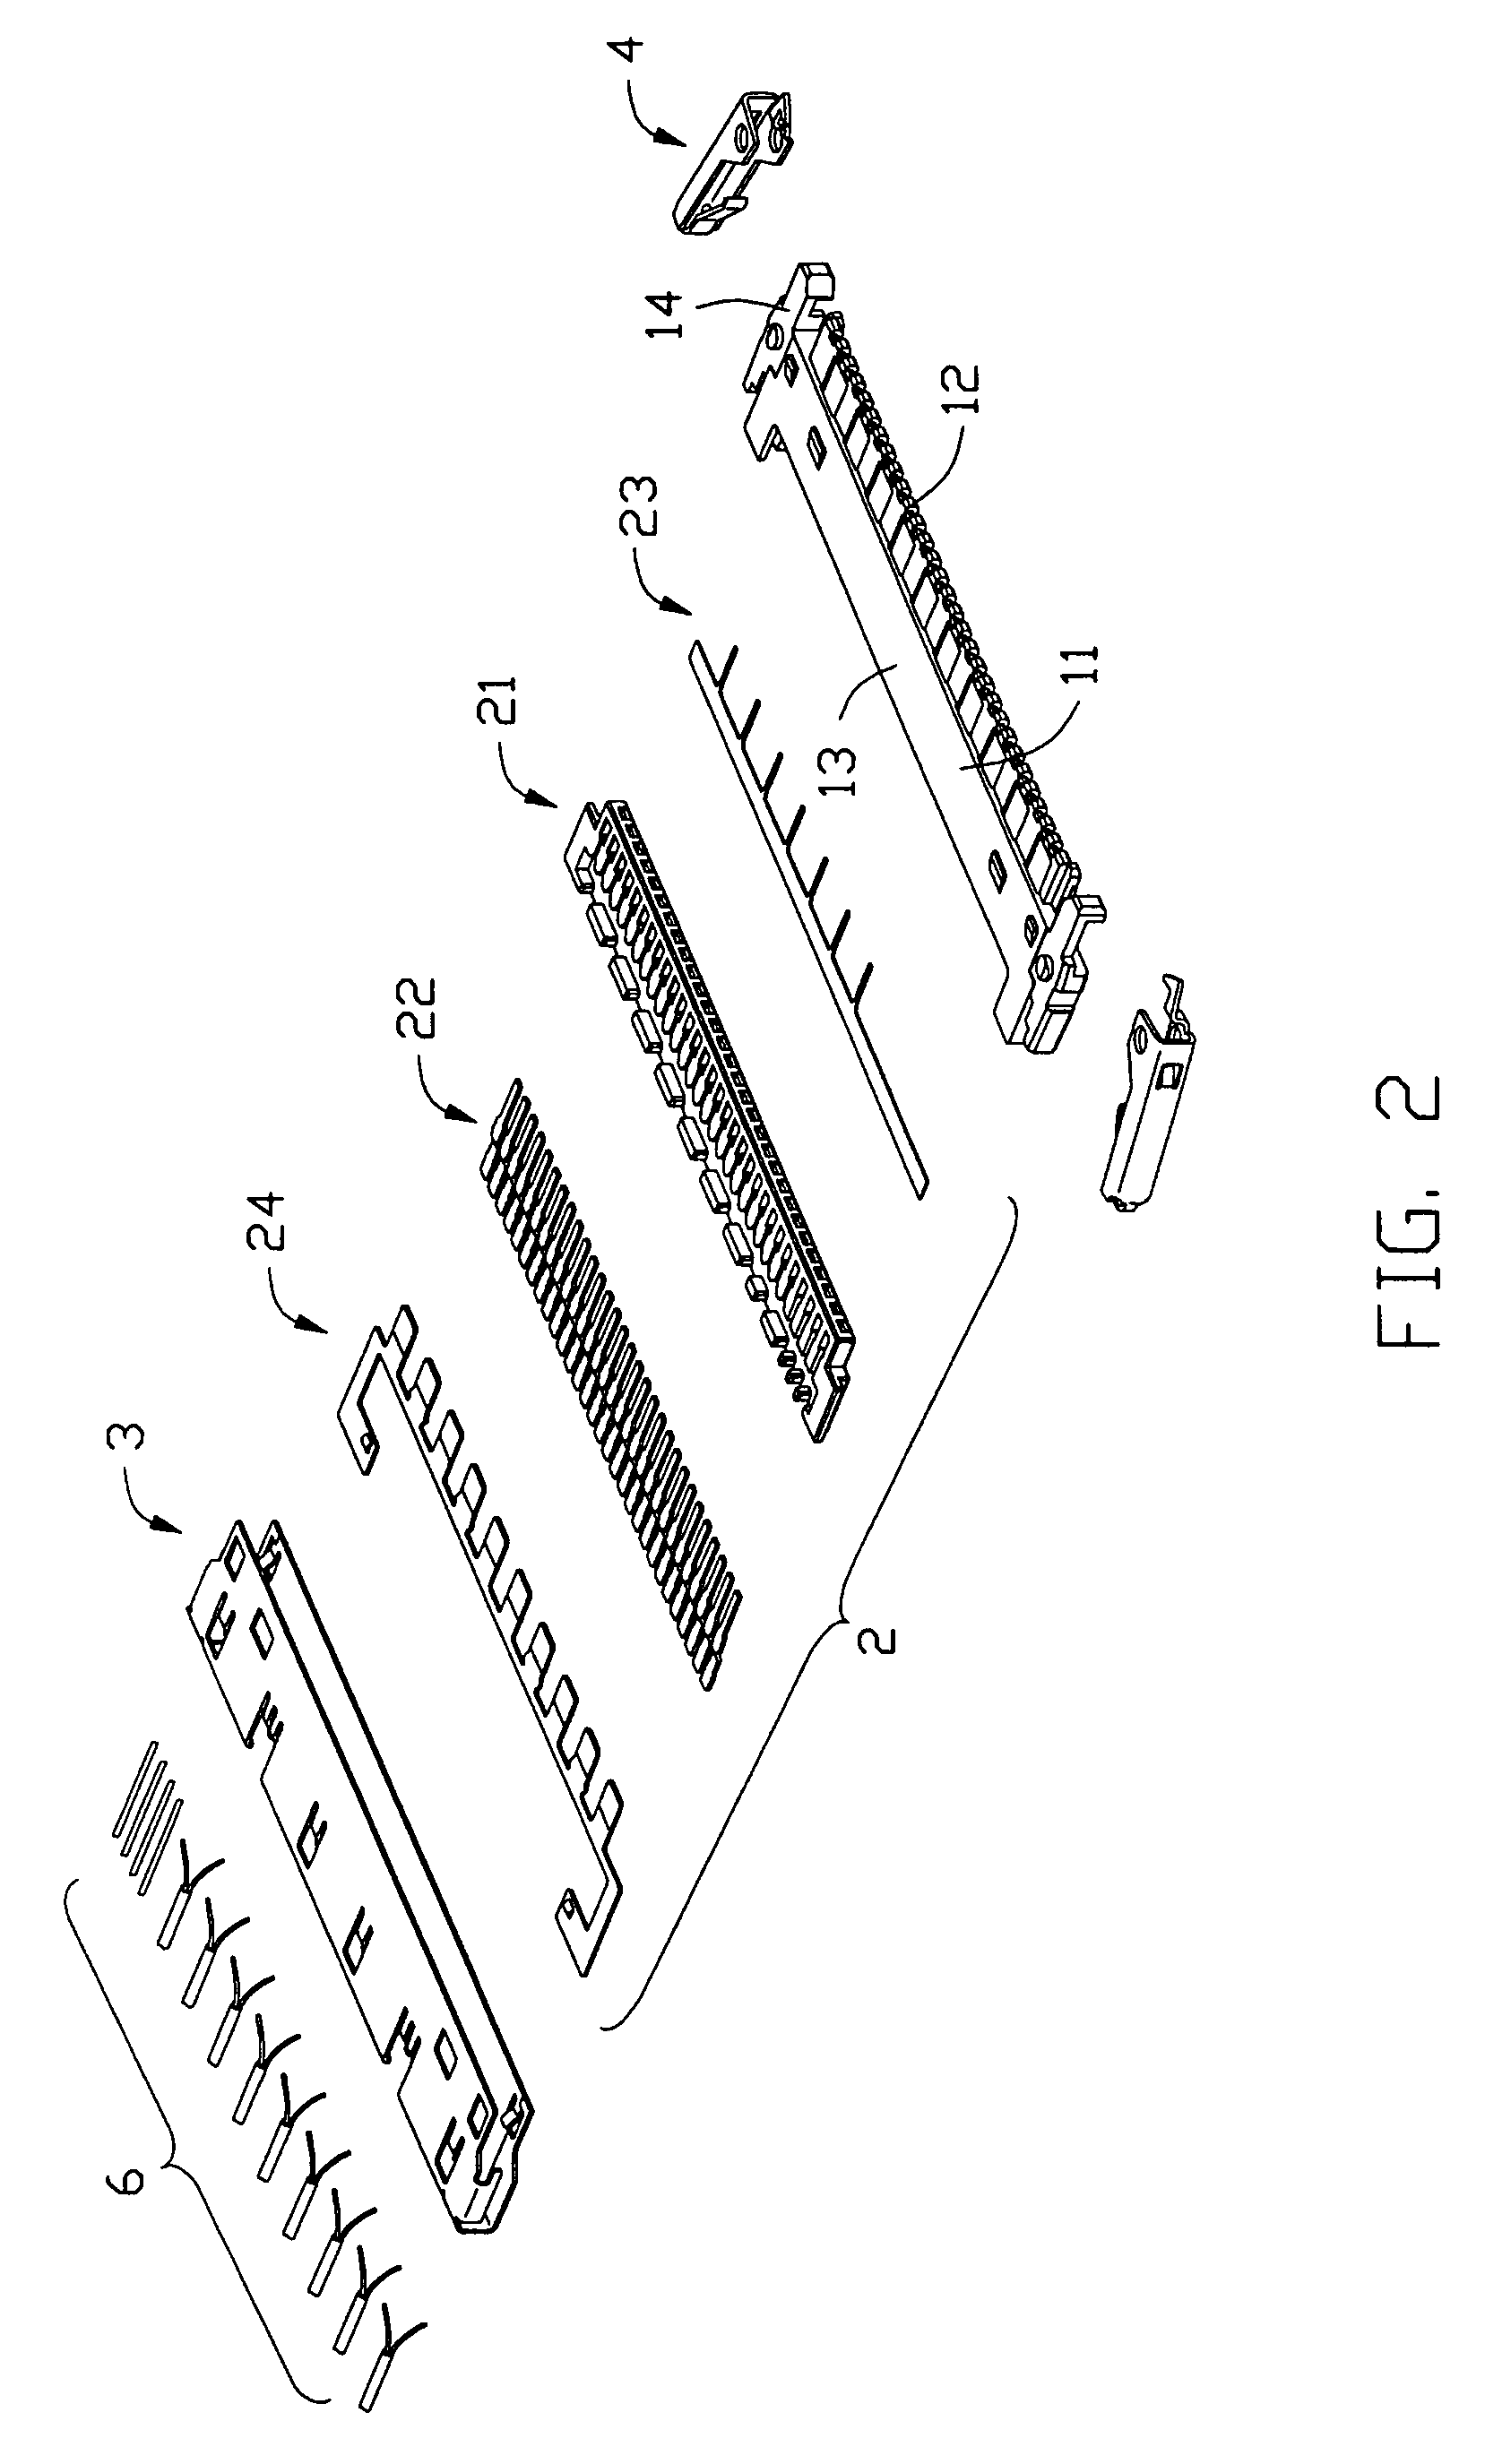 Micro coaxial cable assembly having improved contacts